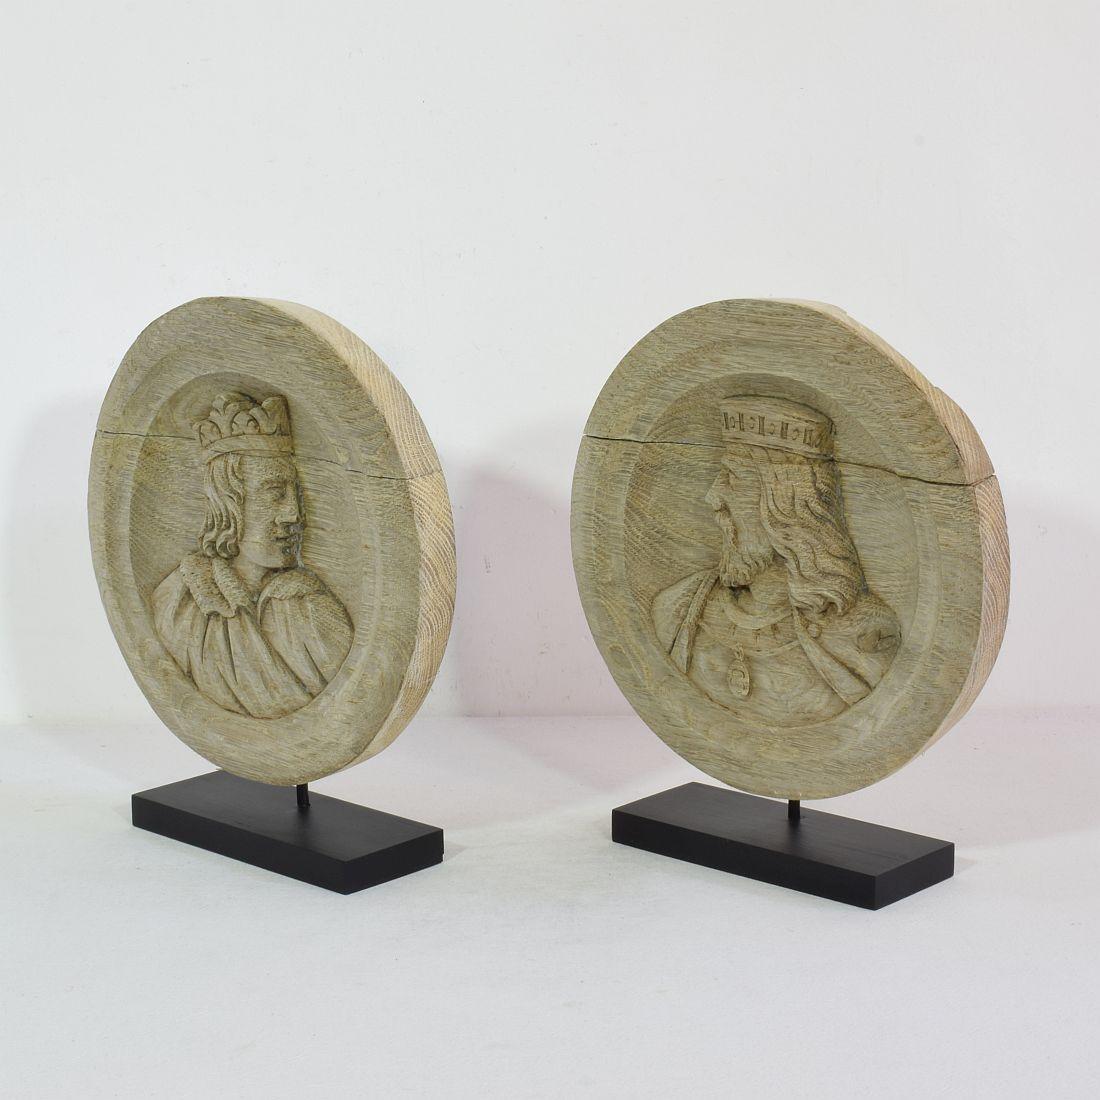 Beautiful weathered oak panels/ Medallions with a nobleman and king.

France, circa 1850-1900, weathered and old repairs

Measurements include the wooden base.